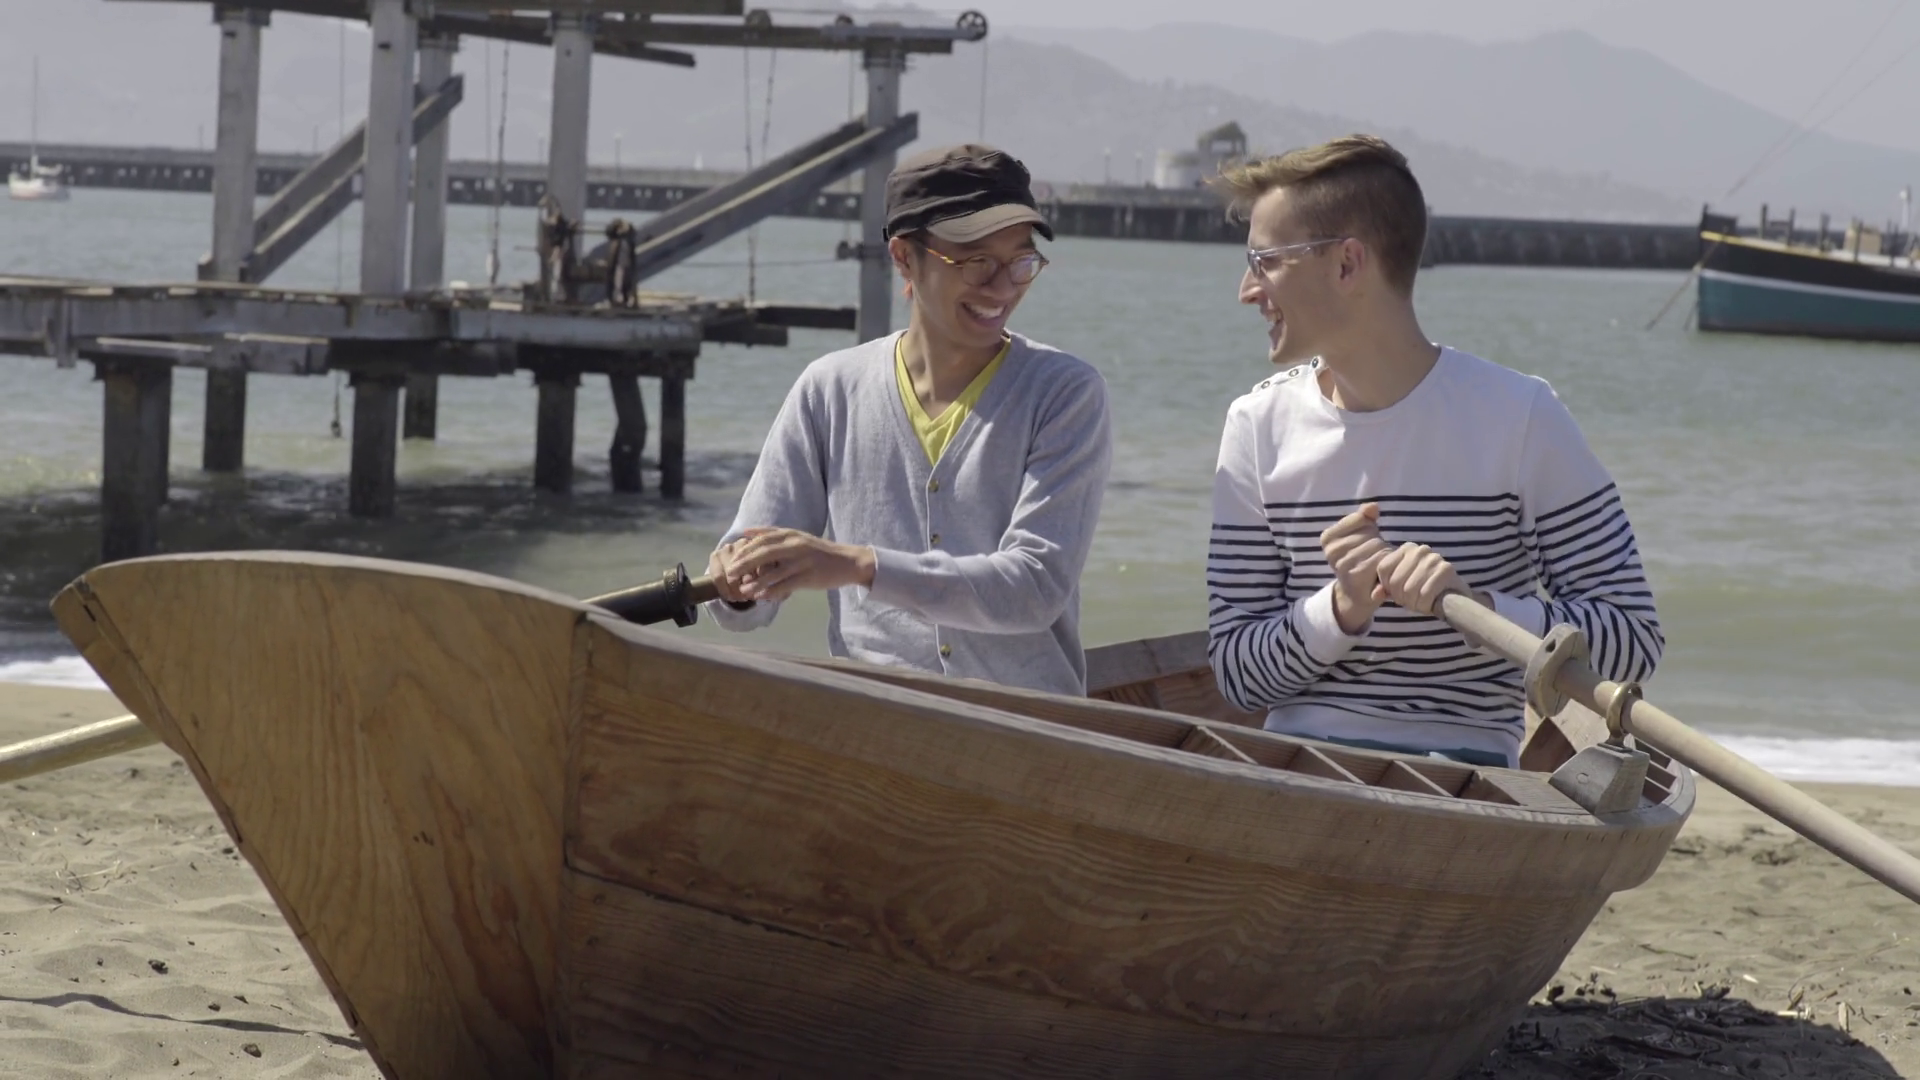 Tourists Pretend To Row An Old Boat At Fisherman's Wharf, Take A ...